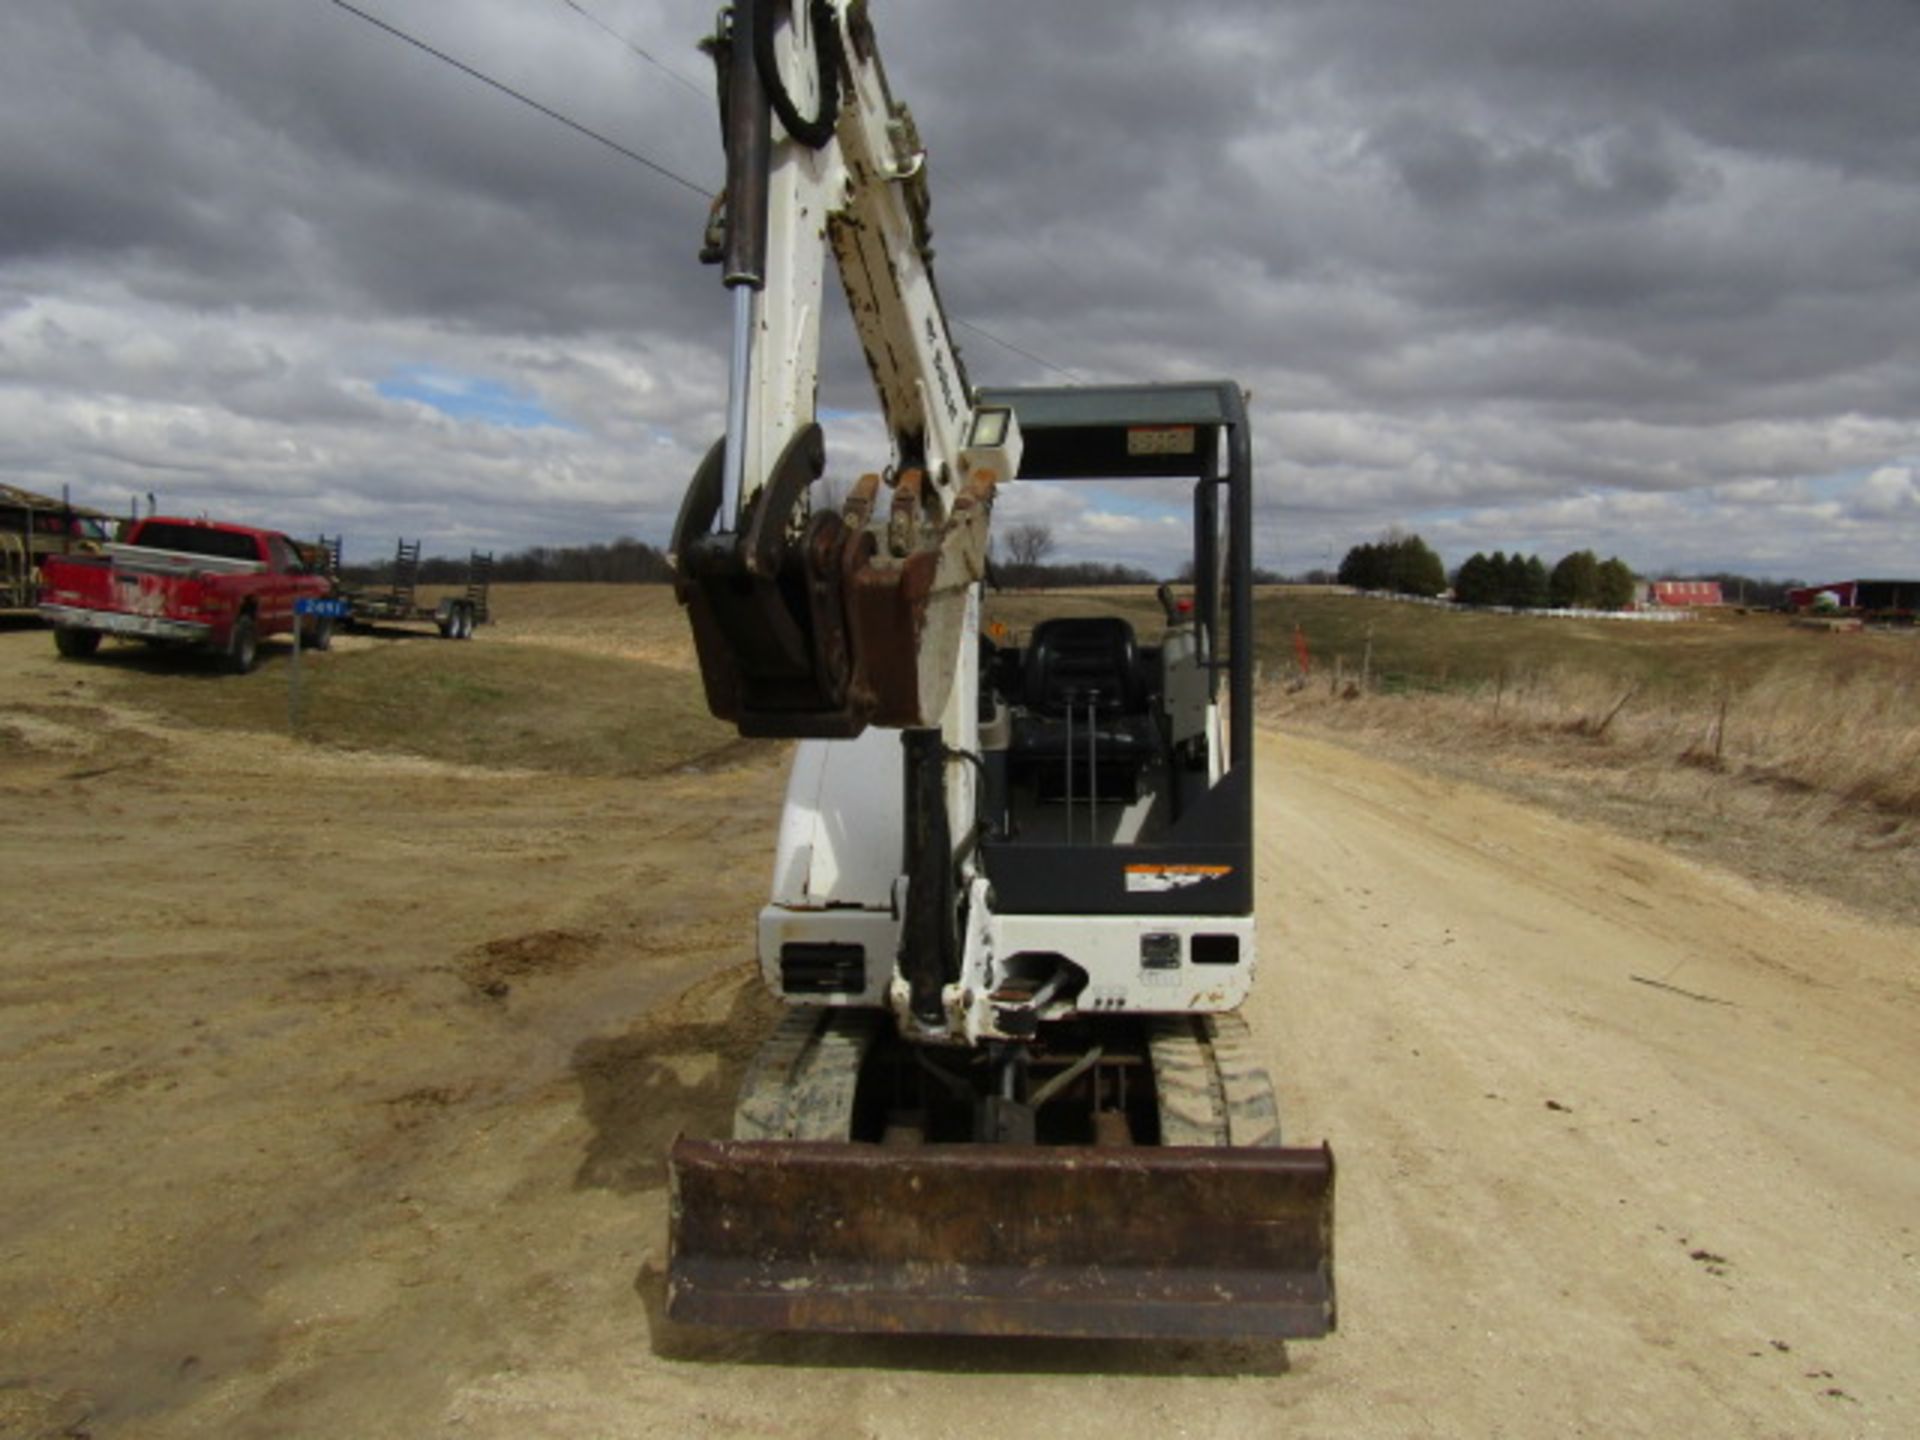 2006 Bobcat 325G Mini Track Hoe, Serial # 234113667, 2327 hours, Located in Hopkinton, IA - Image 2 of 15